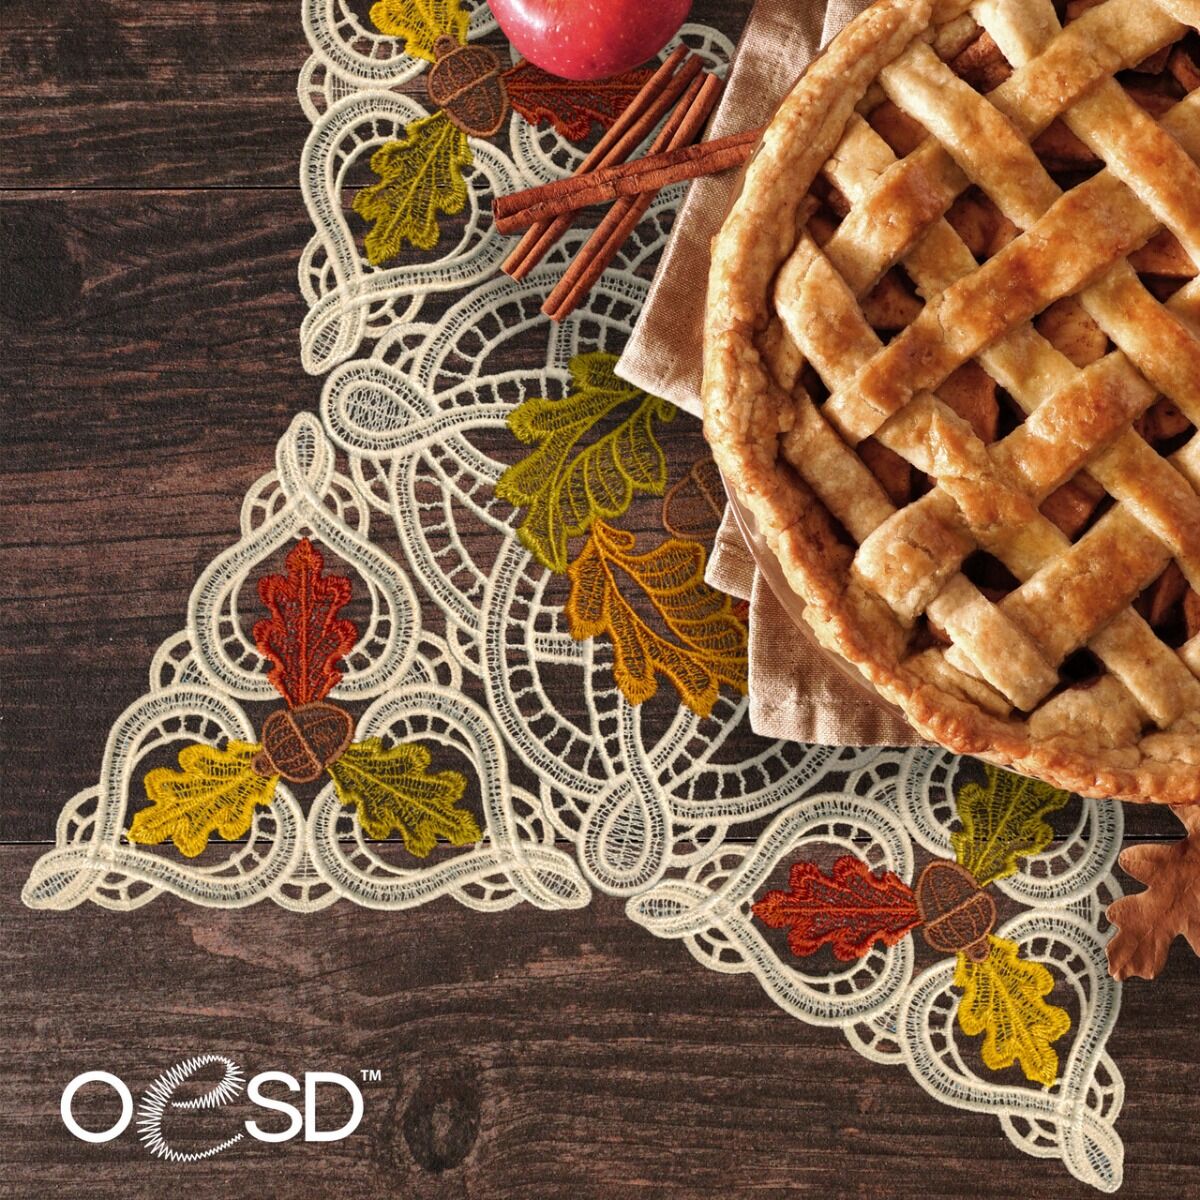 Disk OESD Buildable Doilies Autumn,Disk OESD Buildable Doilies Autumn,Disk OESD Buildable Doilies Autumn,Disk OESD Buildable Doilies Autumn